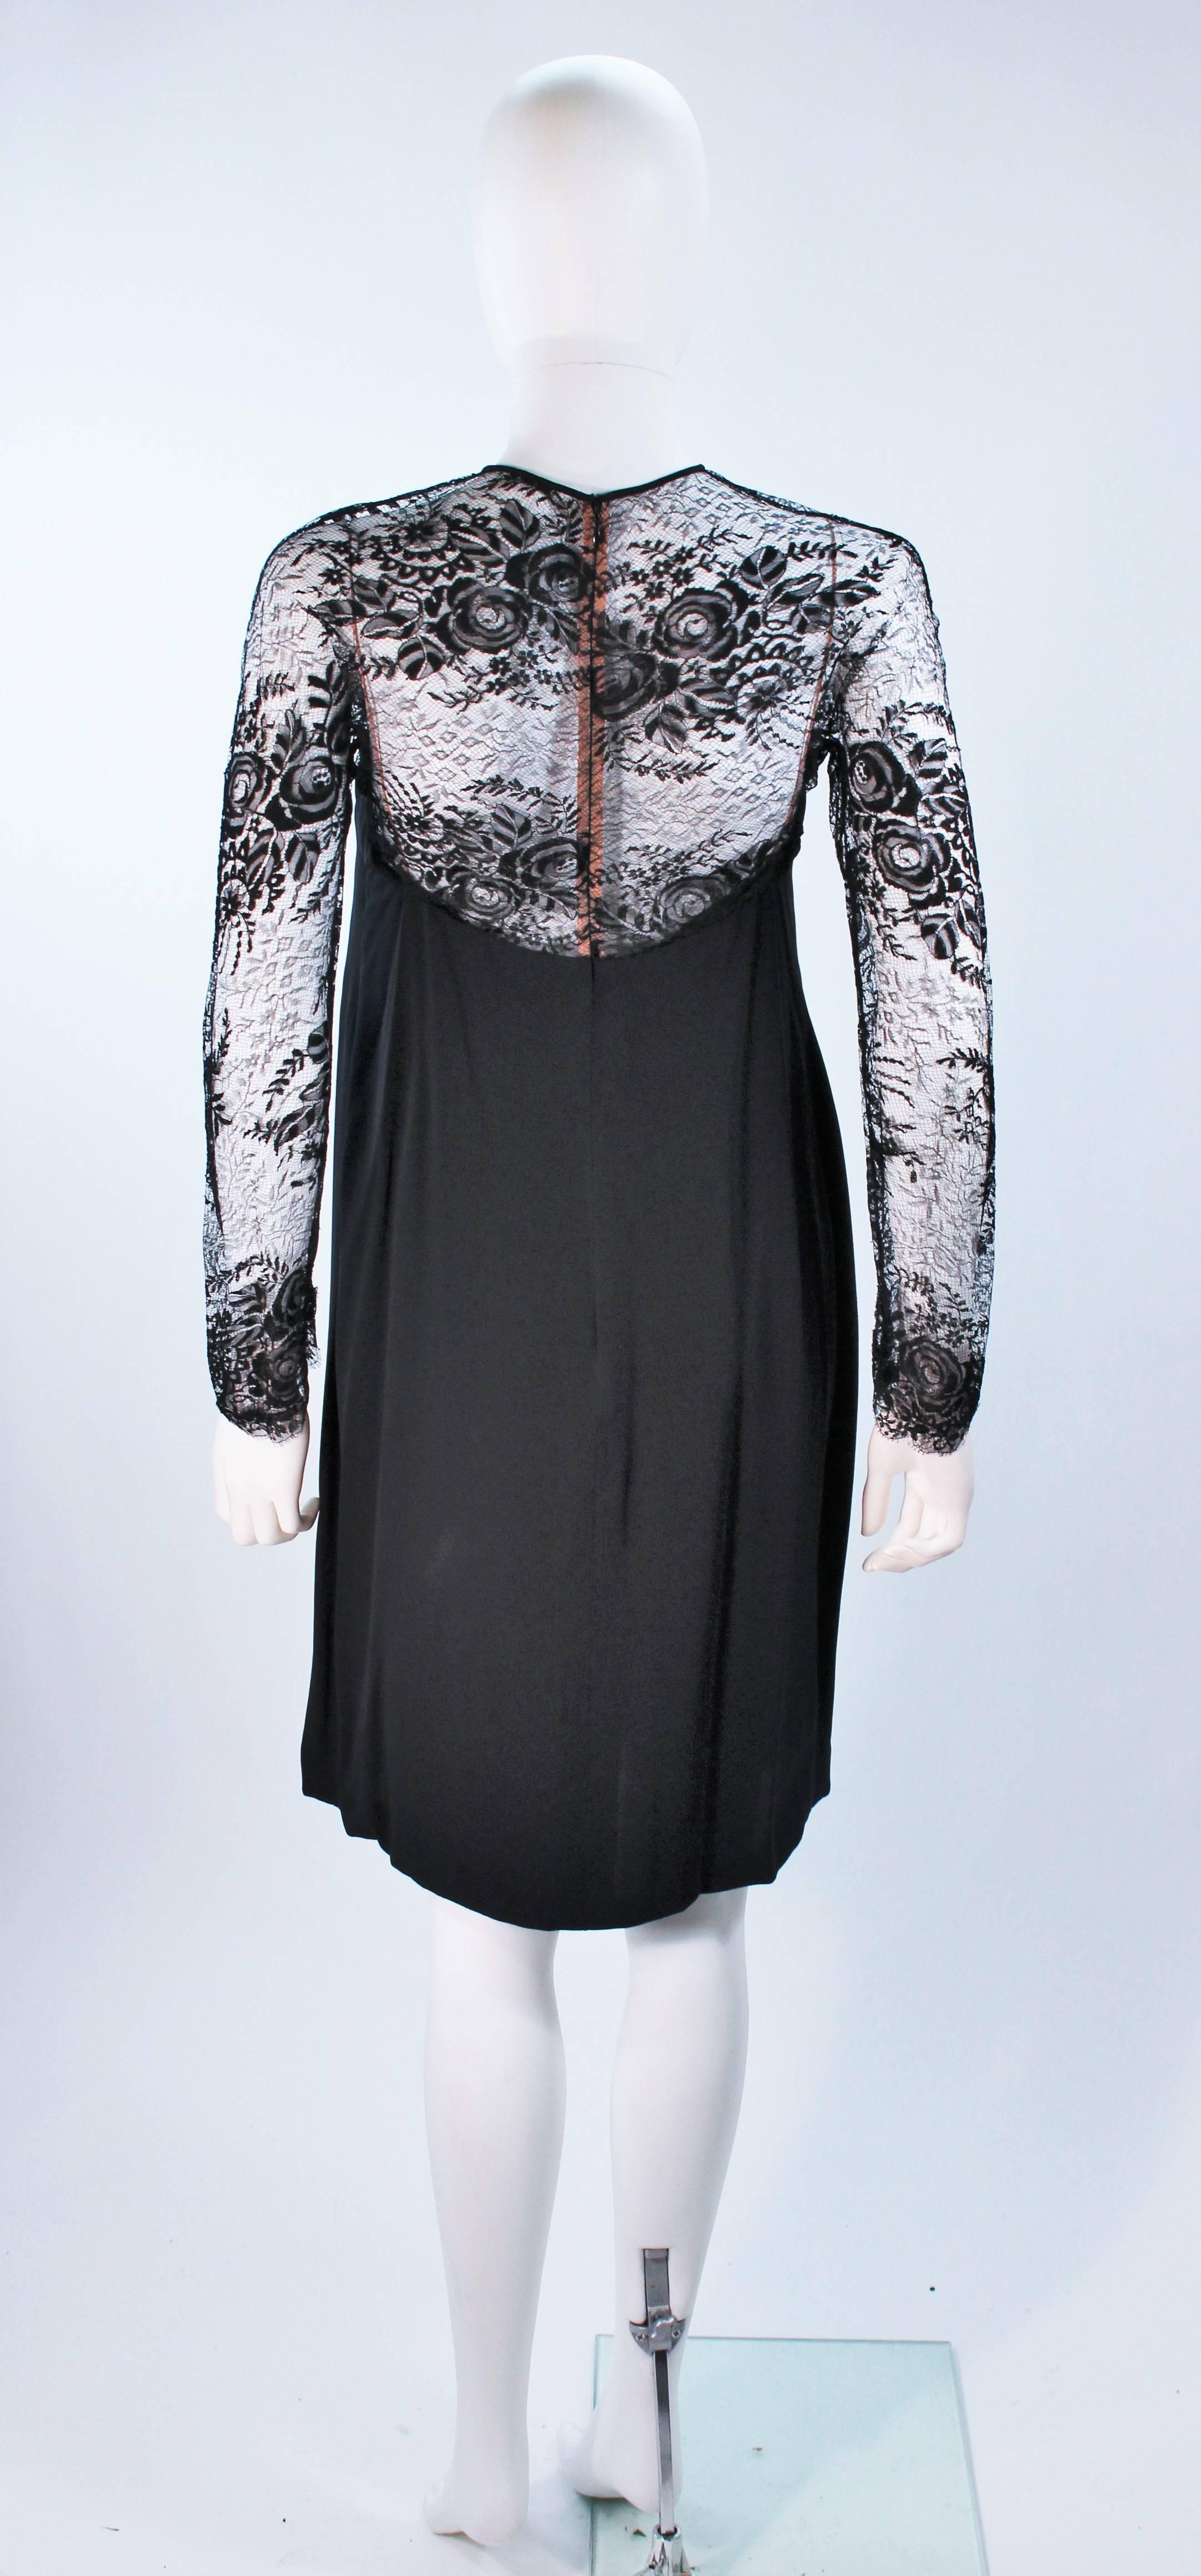 GALANOS Black Lace Cocktail Dress with Metallic Accents Size 8-10 4